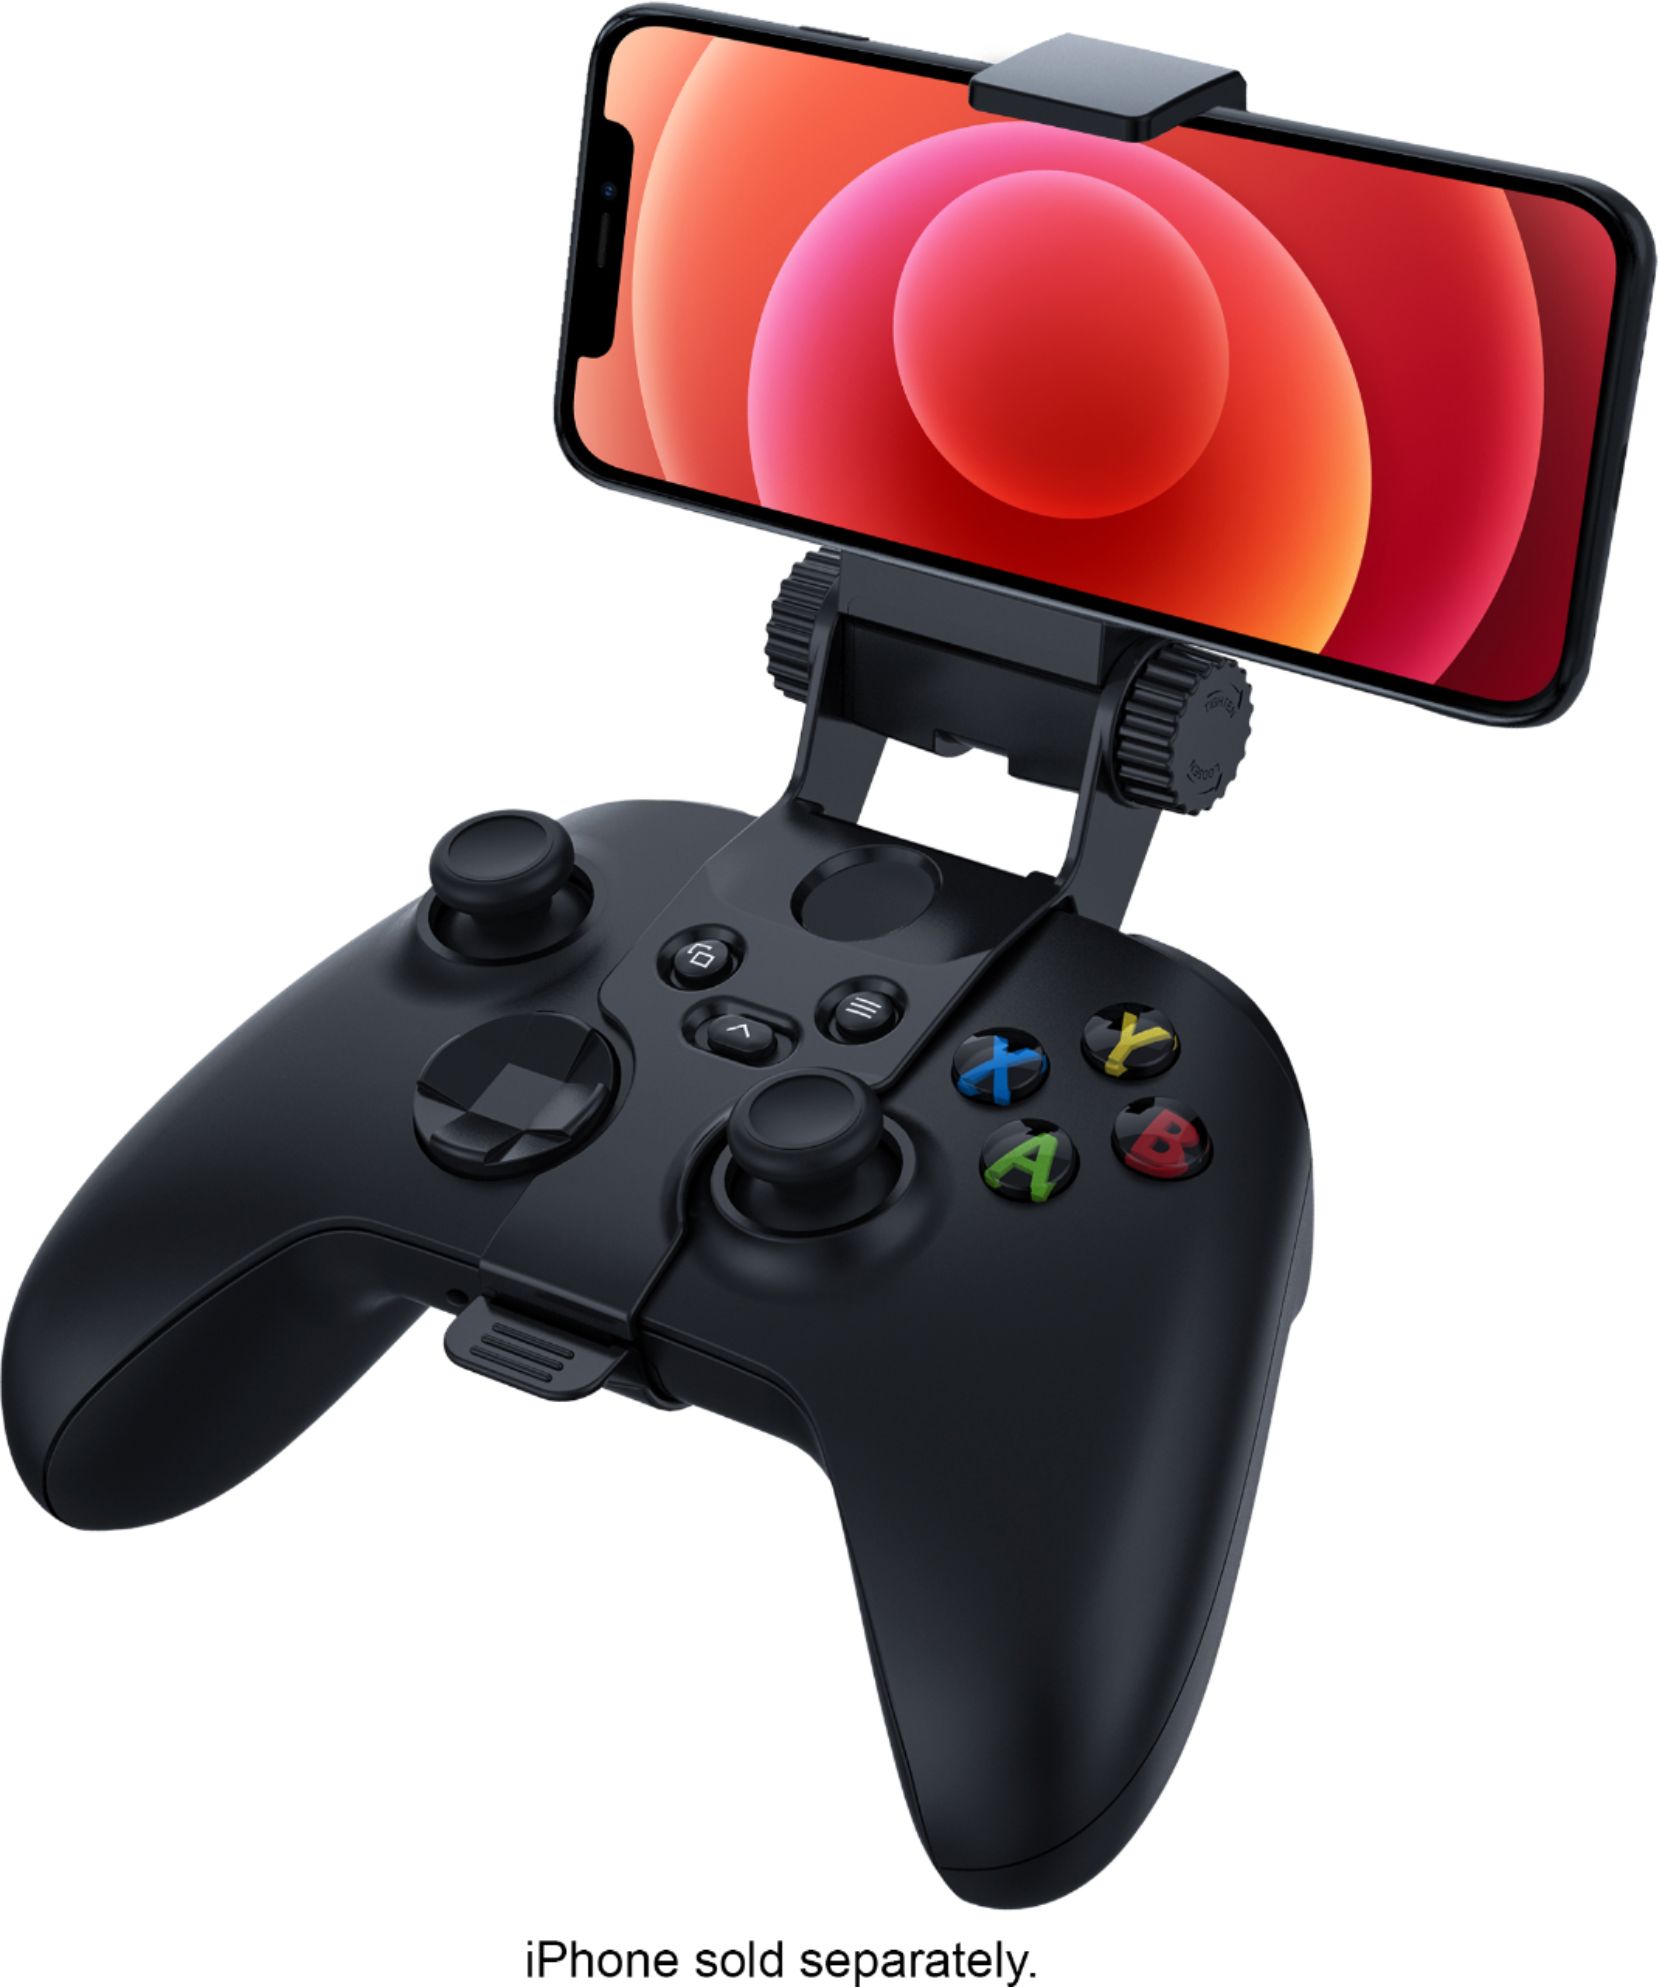 Best Buy: Insignia™ Phone Mount for Xbox Series X|S Controllers